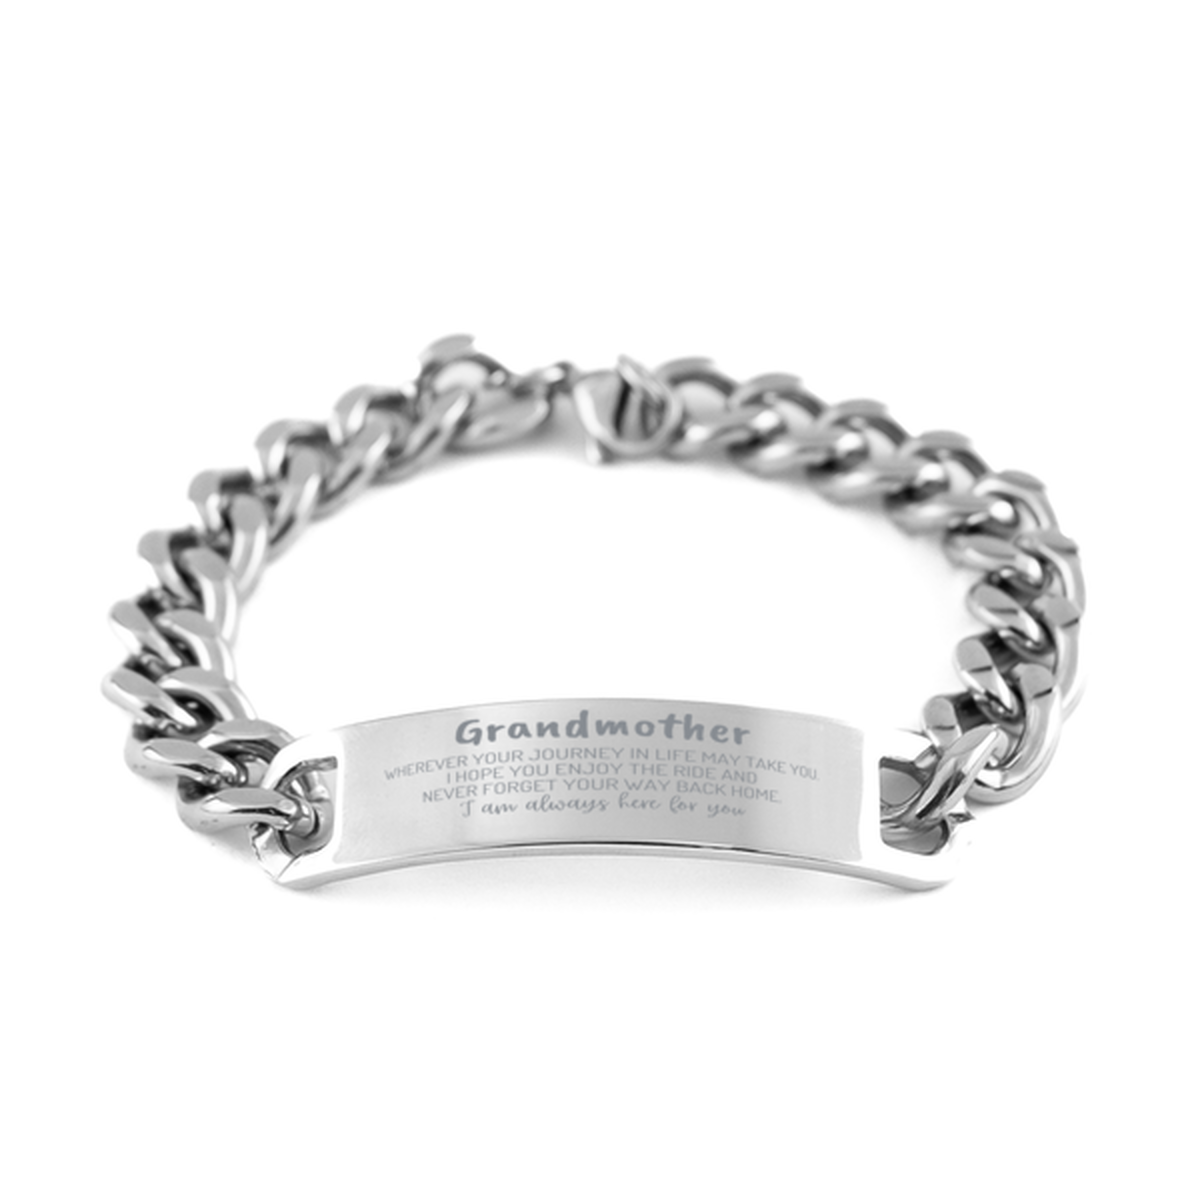 Grandmother wherever your journey in life may take you, I am always here for you Grandmother Cuban Chain Stainless Steel Bracelet, Awesome Christmas Gifts For Grandmother, Grandmother Birthday Gifts for Men Women Family Loved One